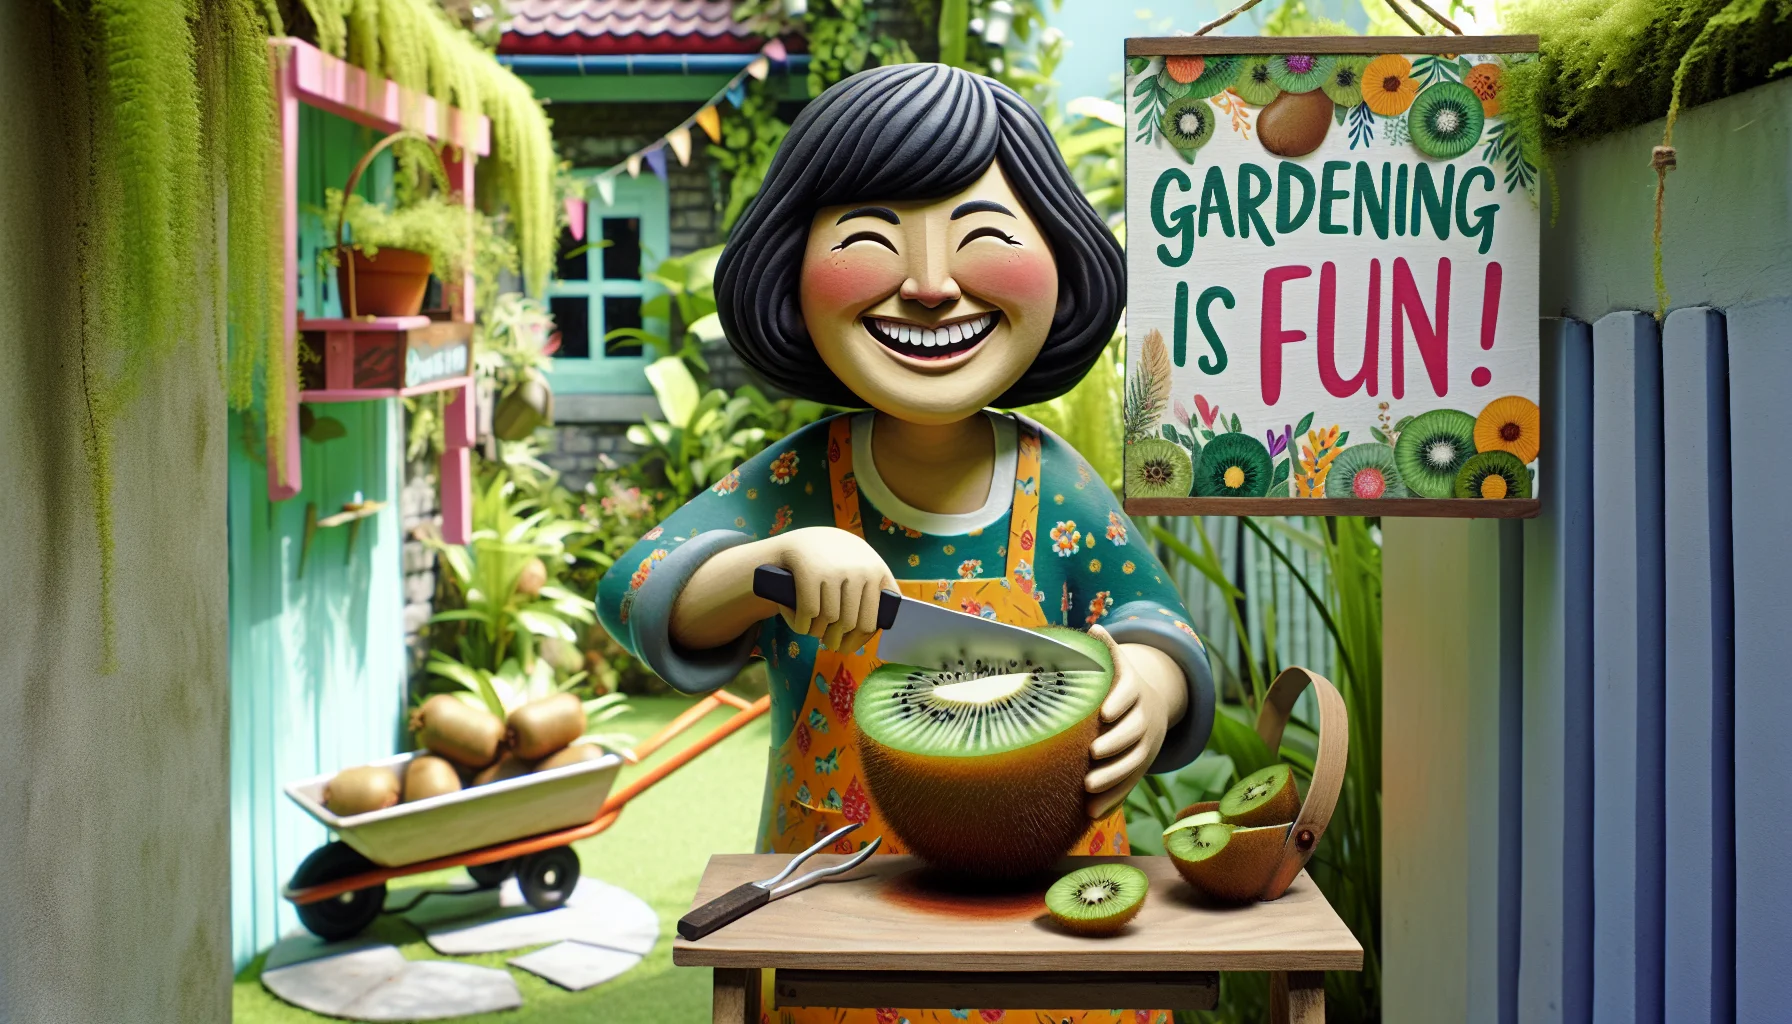 Imagine a light-hearted, whimsical scenario set outdoors in a happy and sunny garden, with a charmingly designed signage that reads 'Gardening is fun'. A ripe kiwi fruit is being sliced open by a friendly, South Asian woman with a big smile on her face. Show her wearing a vibrant apron and holding the kiwi fruit in one hand, with a clean, shining knife in the other. The kiwi fruit is perfectly ripe with a bright green interior, and juicy black seeds encased inside. The surroundings are lush with plants and you can see a small wheelbarrow filled with gardening tools in the background.